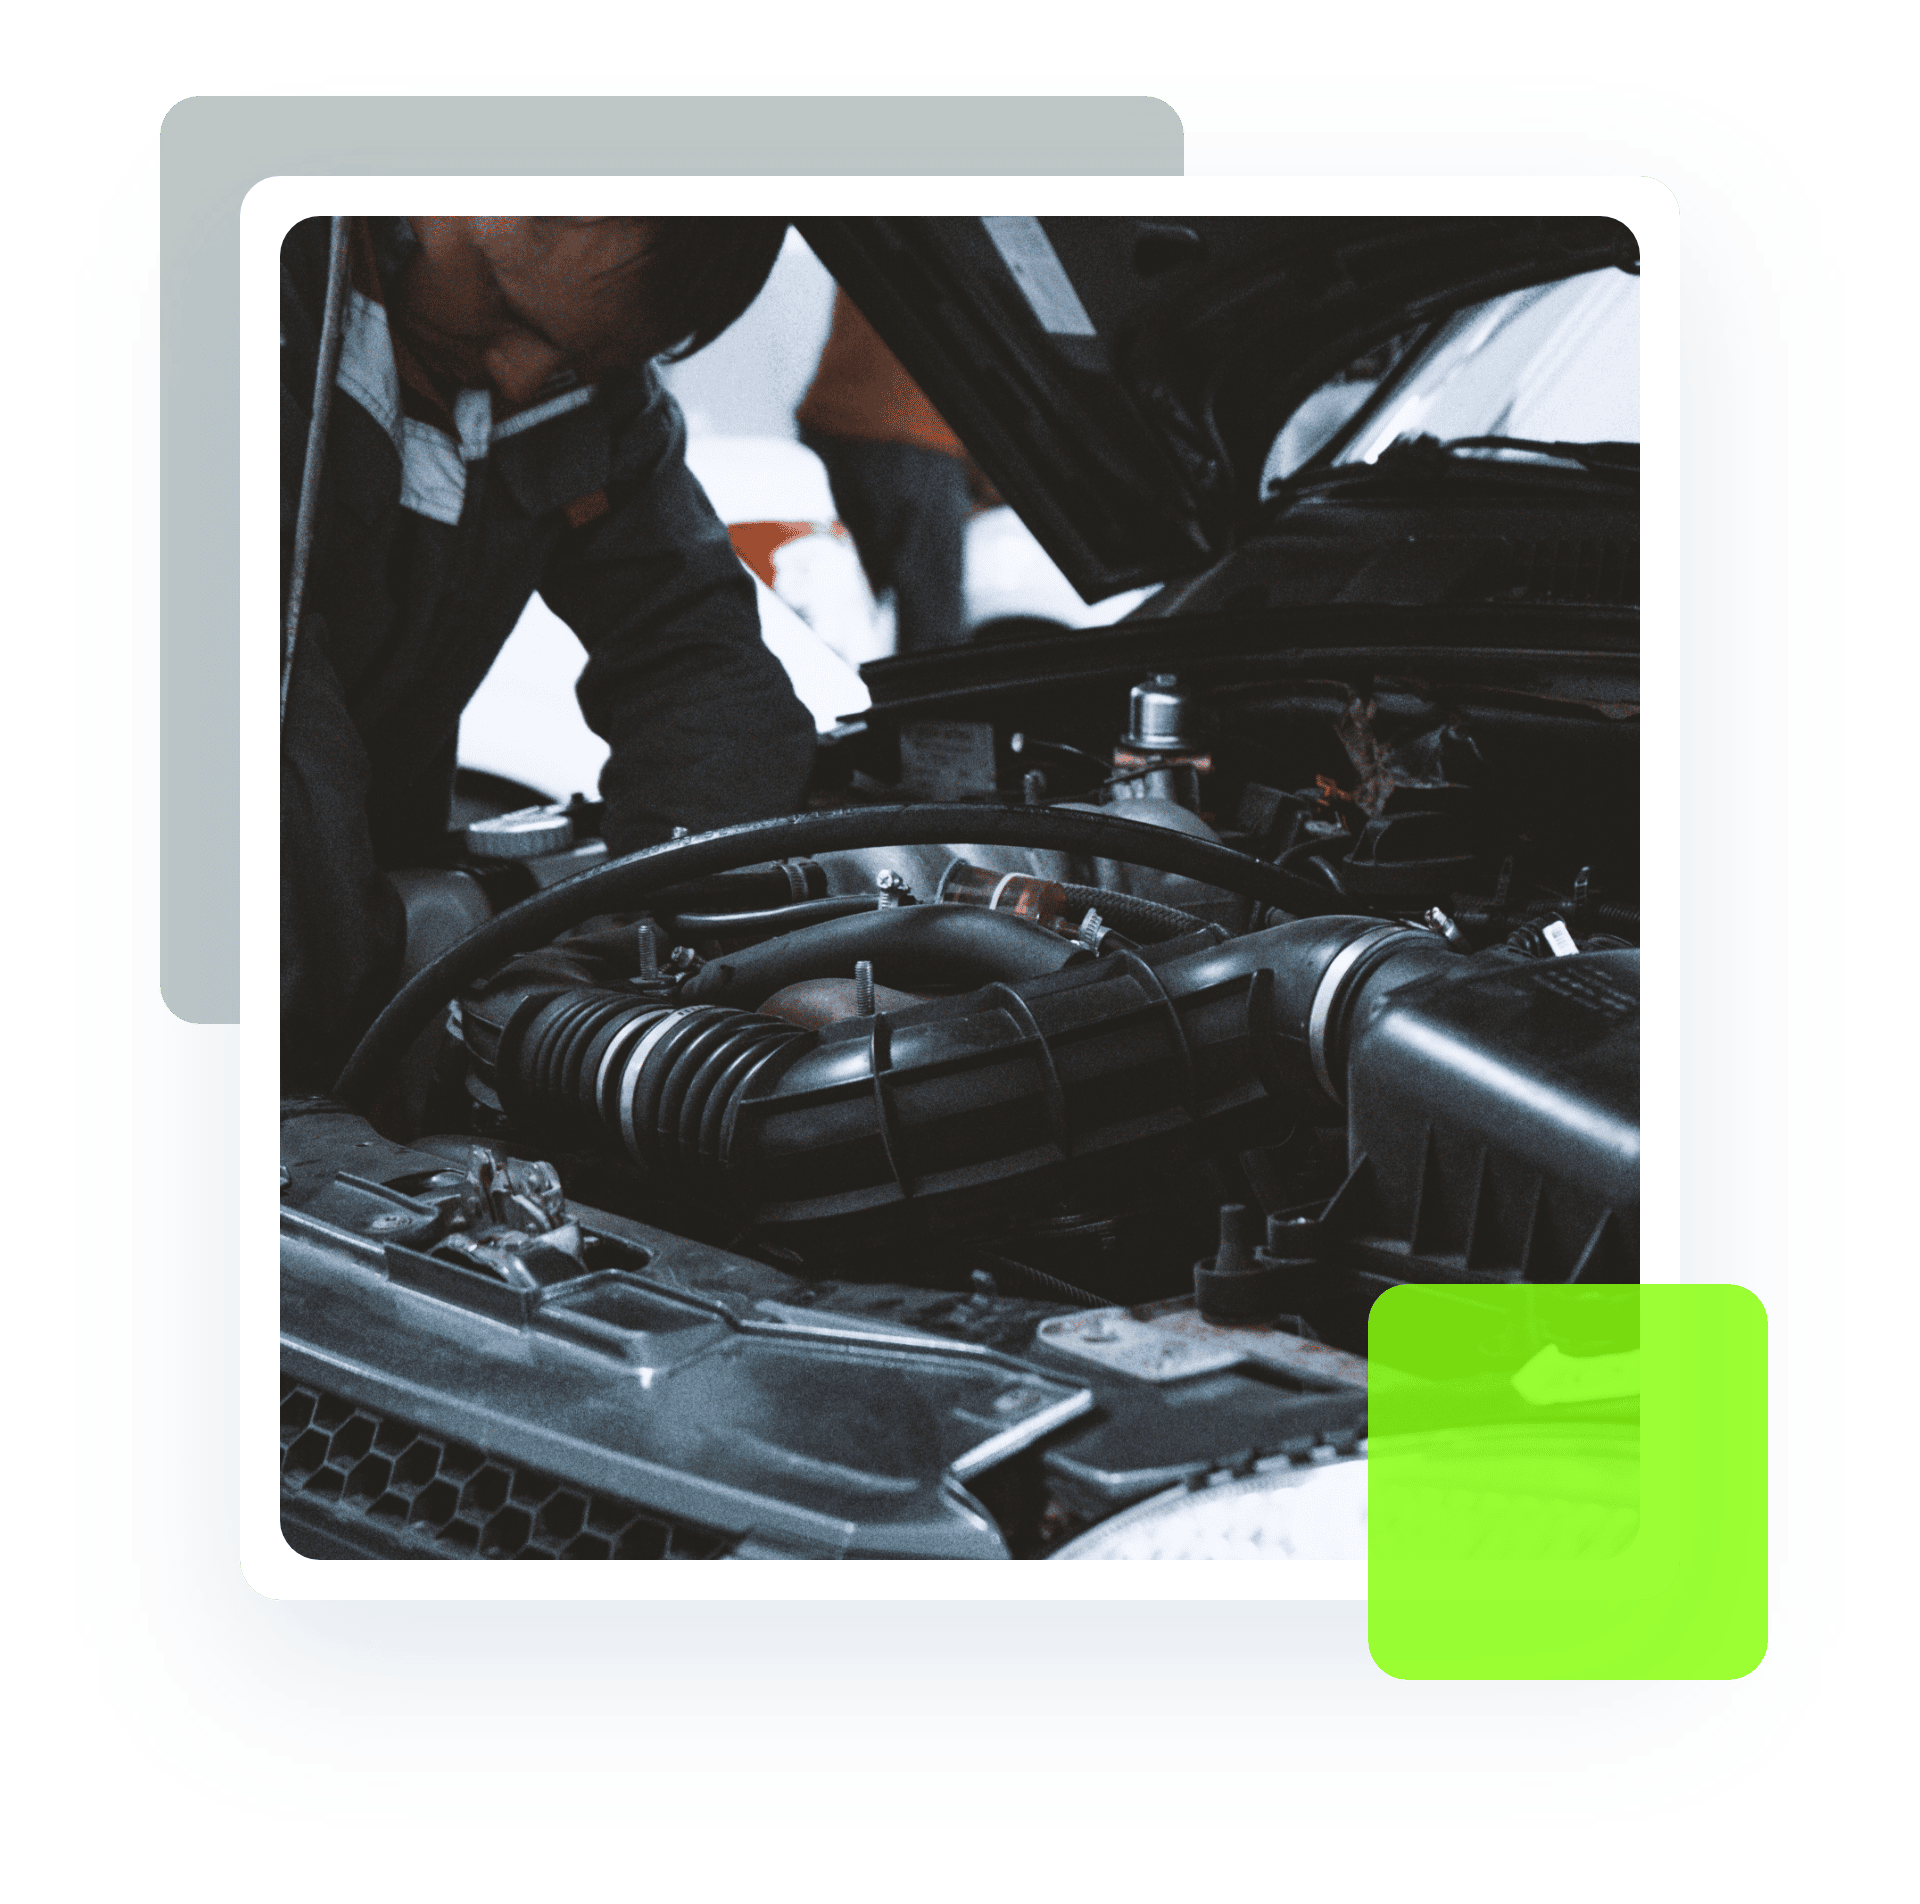 Image of an auto technician, checking the interior component of a vehicle under the hood. Concept image of preventative maintenance at Quality Car Care in North Liberty, IA.